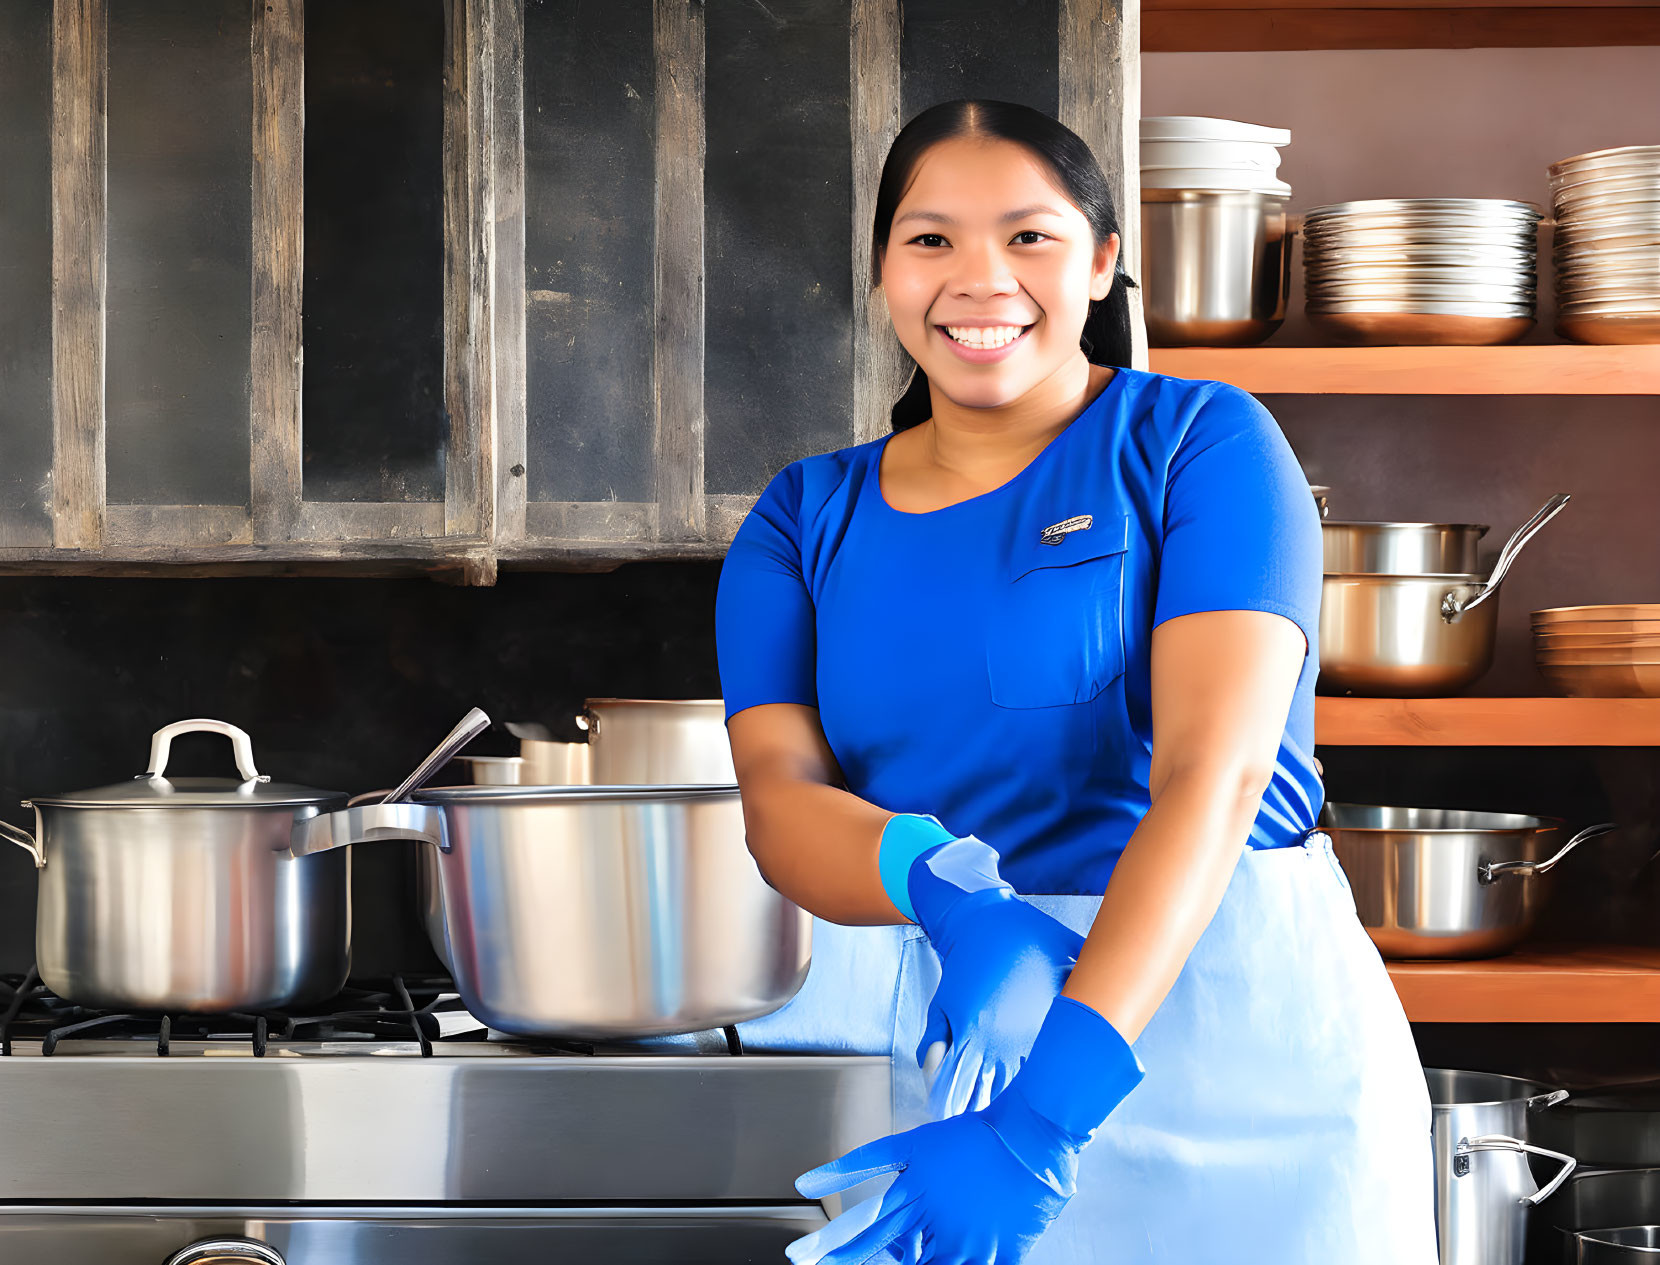 Person in Blue Apron Smiling in Kitchen Setting